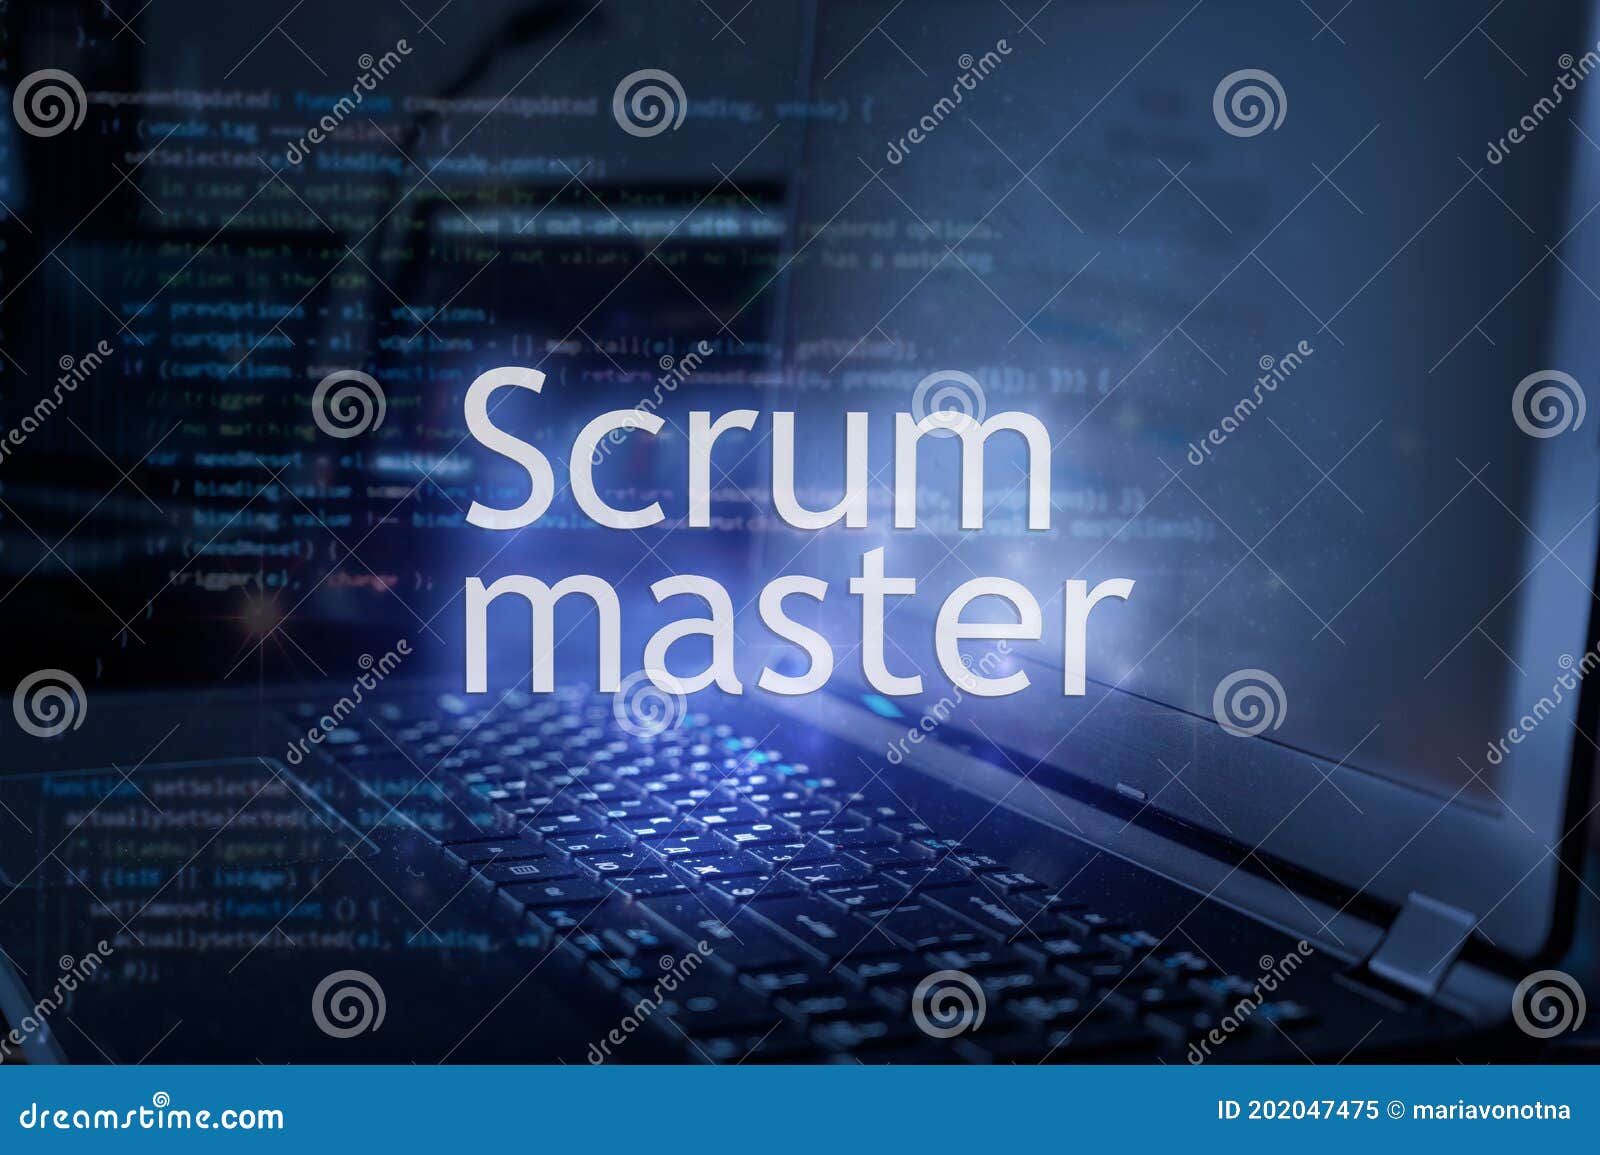 scrum master inscription against laptop and code background. scrum is facilitated by a scrum master